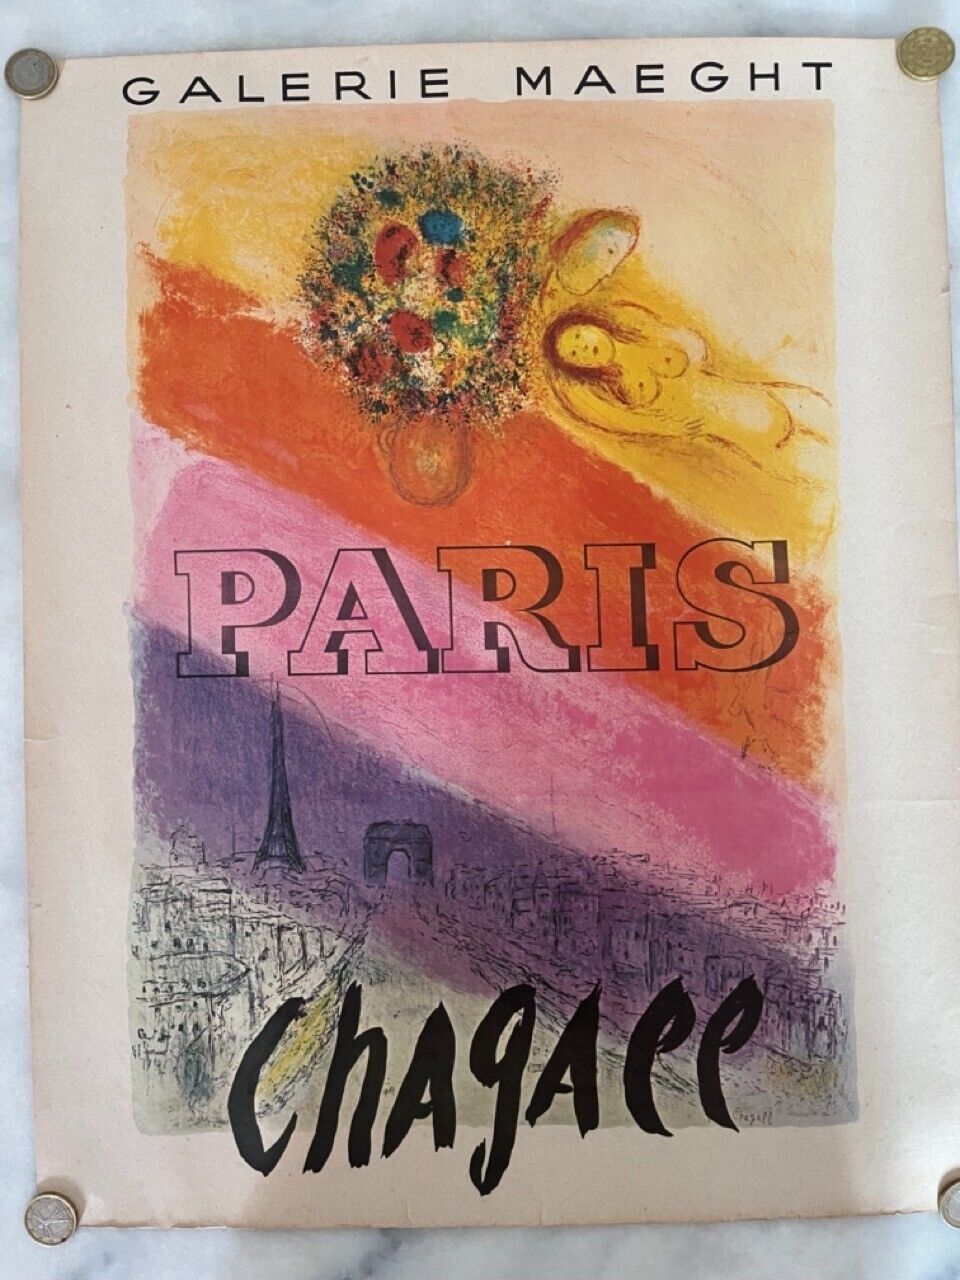 Vintage Chagall Poster, Maeght Gallery - Museum Prints Society 1950s - 50.5x40c